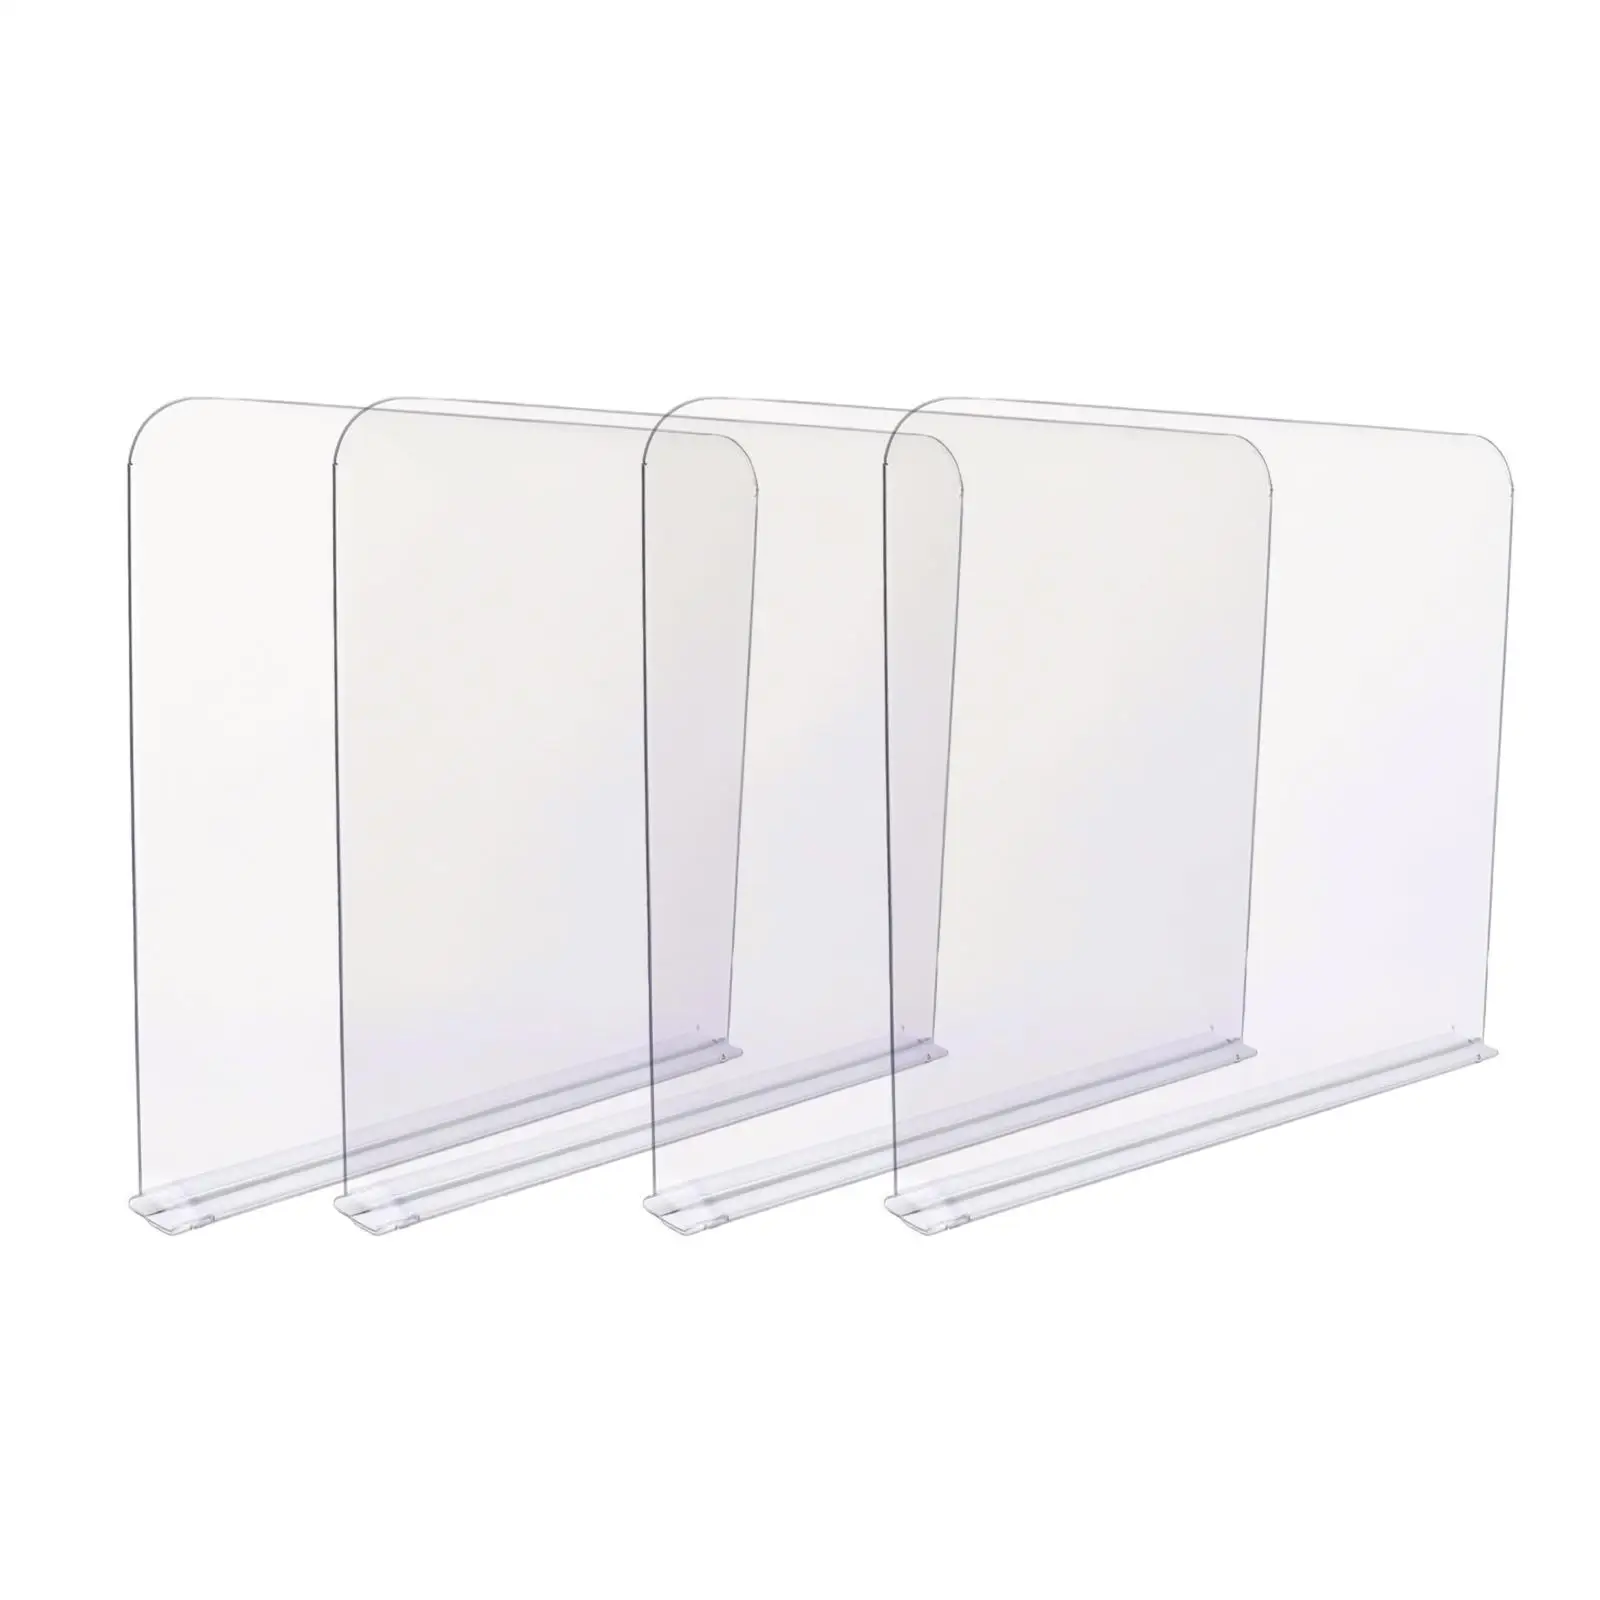 Acrylic Closet Shelf Clear Wardrobe Divider Lightweight Multipurpose Shelf Dividers for Drawers Cabinets Closet Bedroom Bookcase